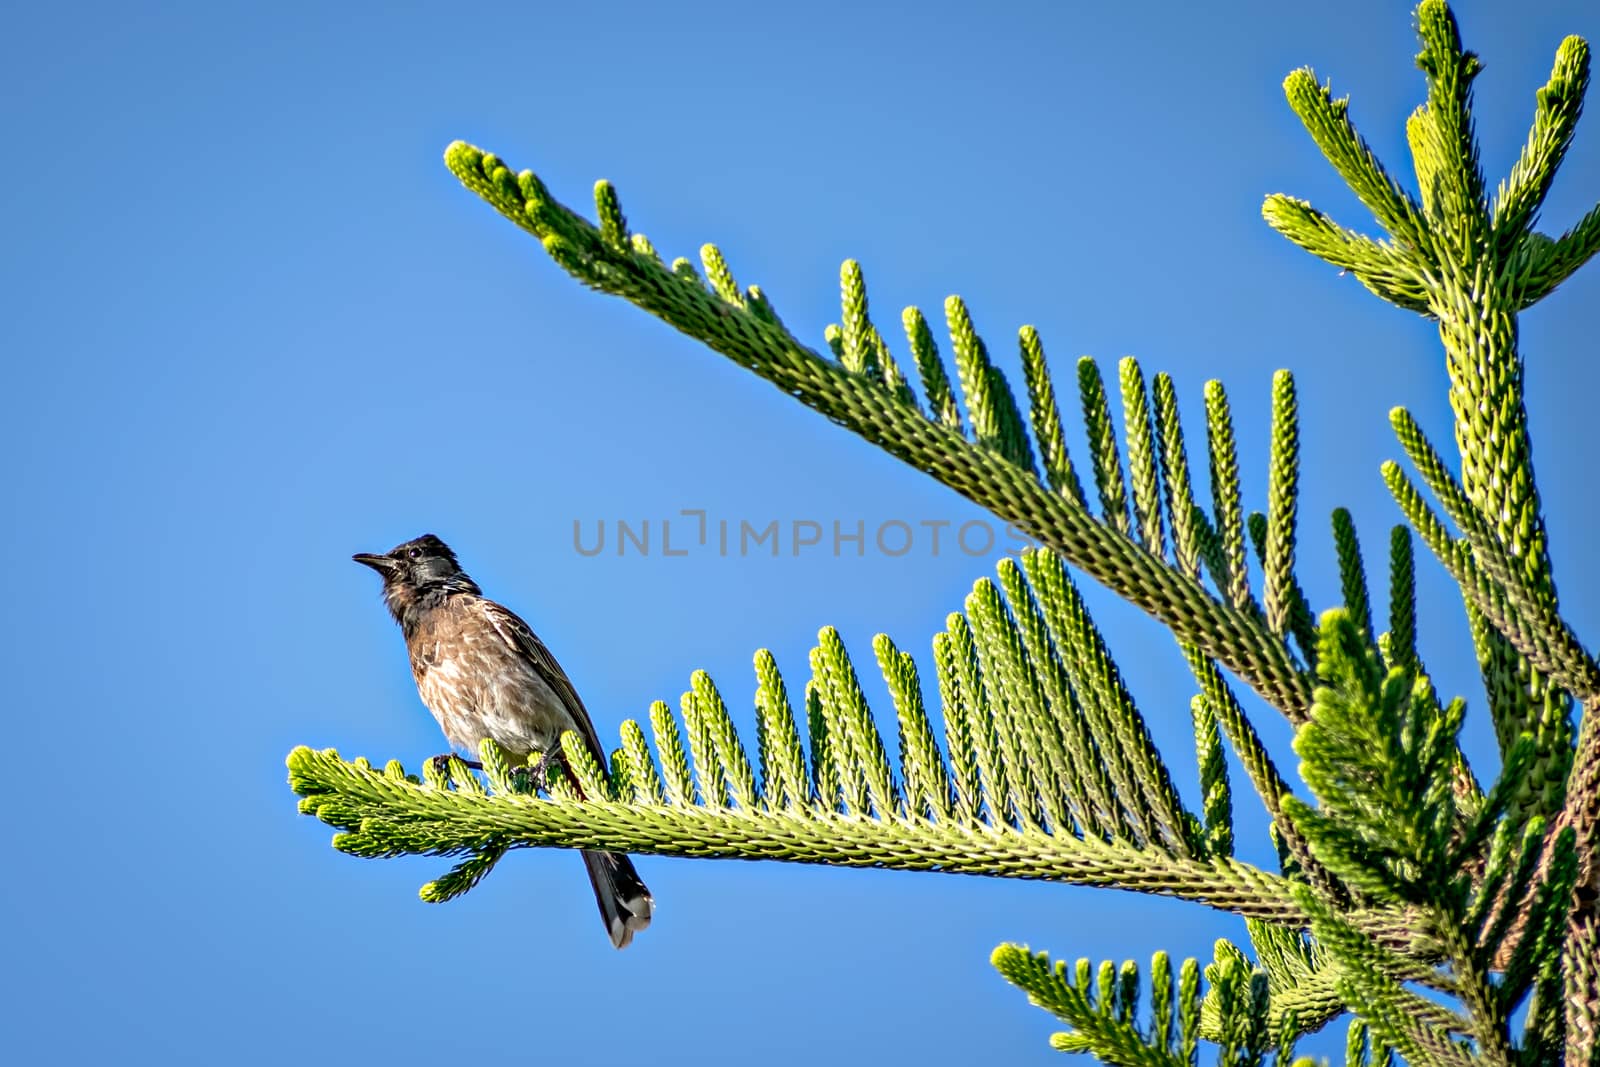 Red vented bulbul sitting on attractive Juniper tree branch leaves with clear blue sky background.